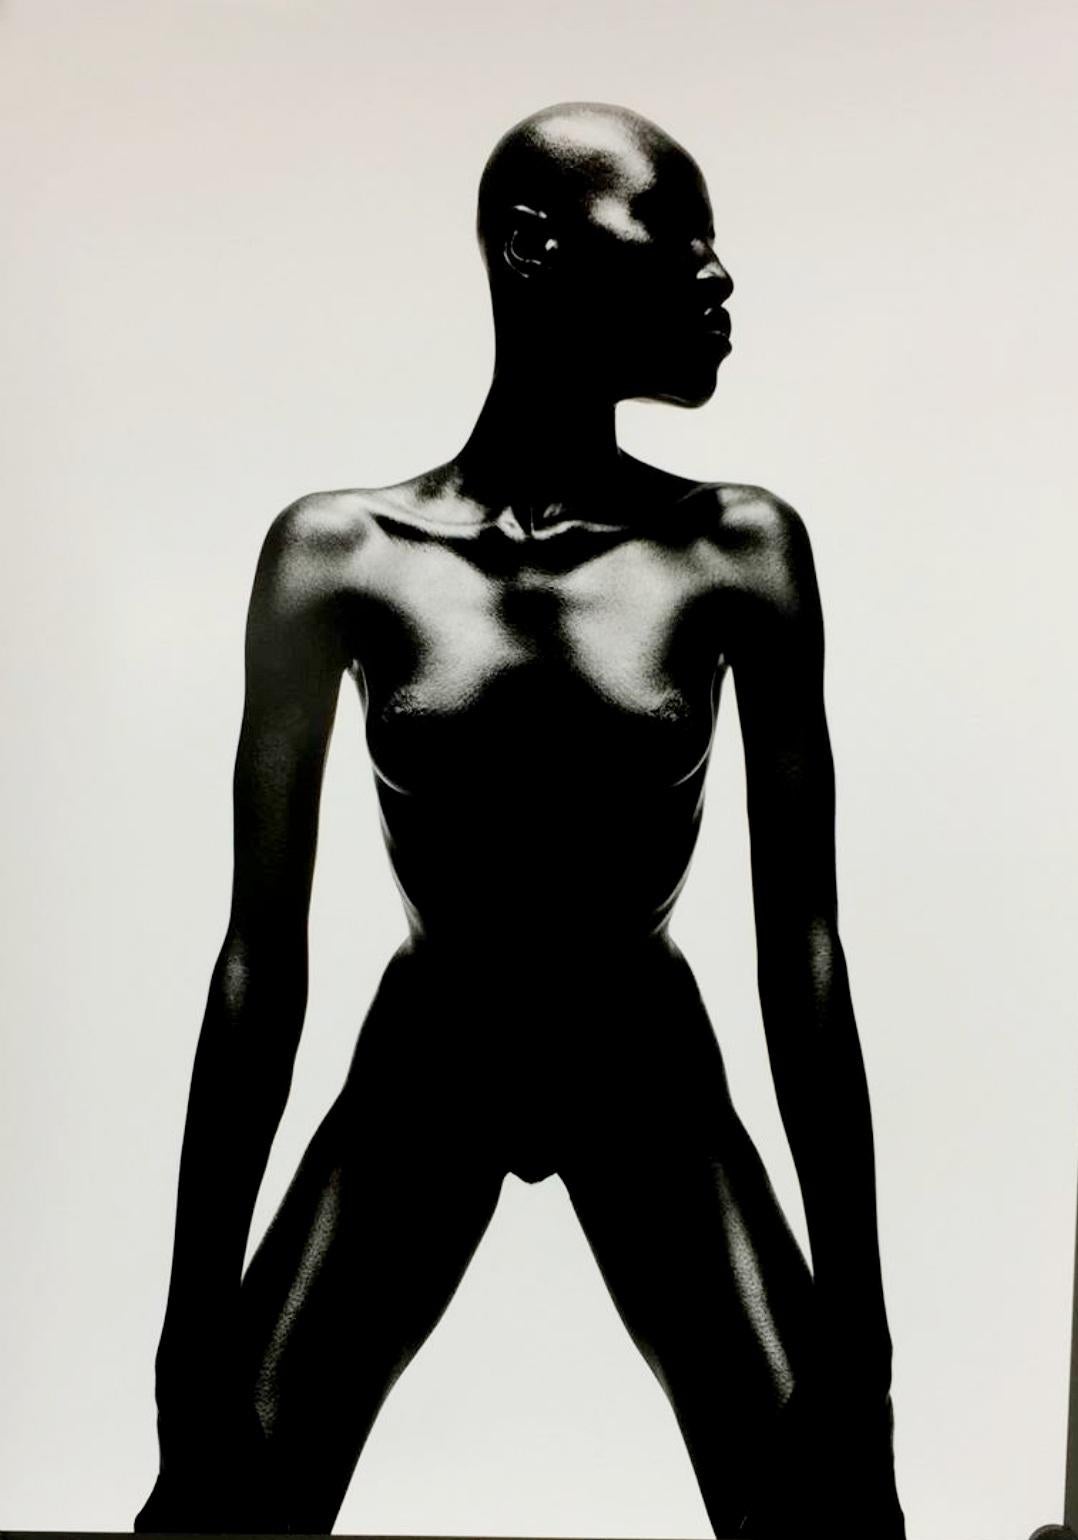 THIERRY LE GOUES - Nude Prisca - Soul Series 1996 "Black is Beautiful"